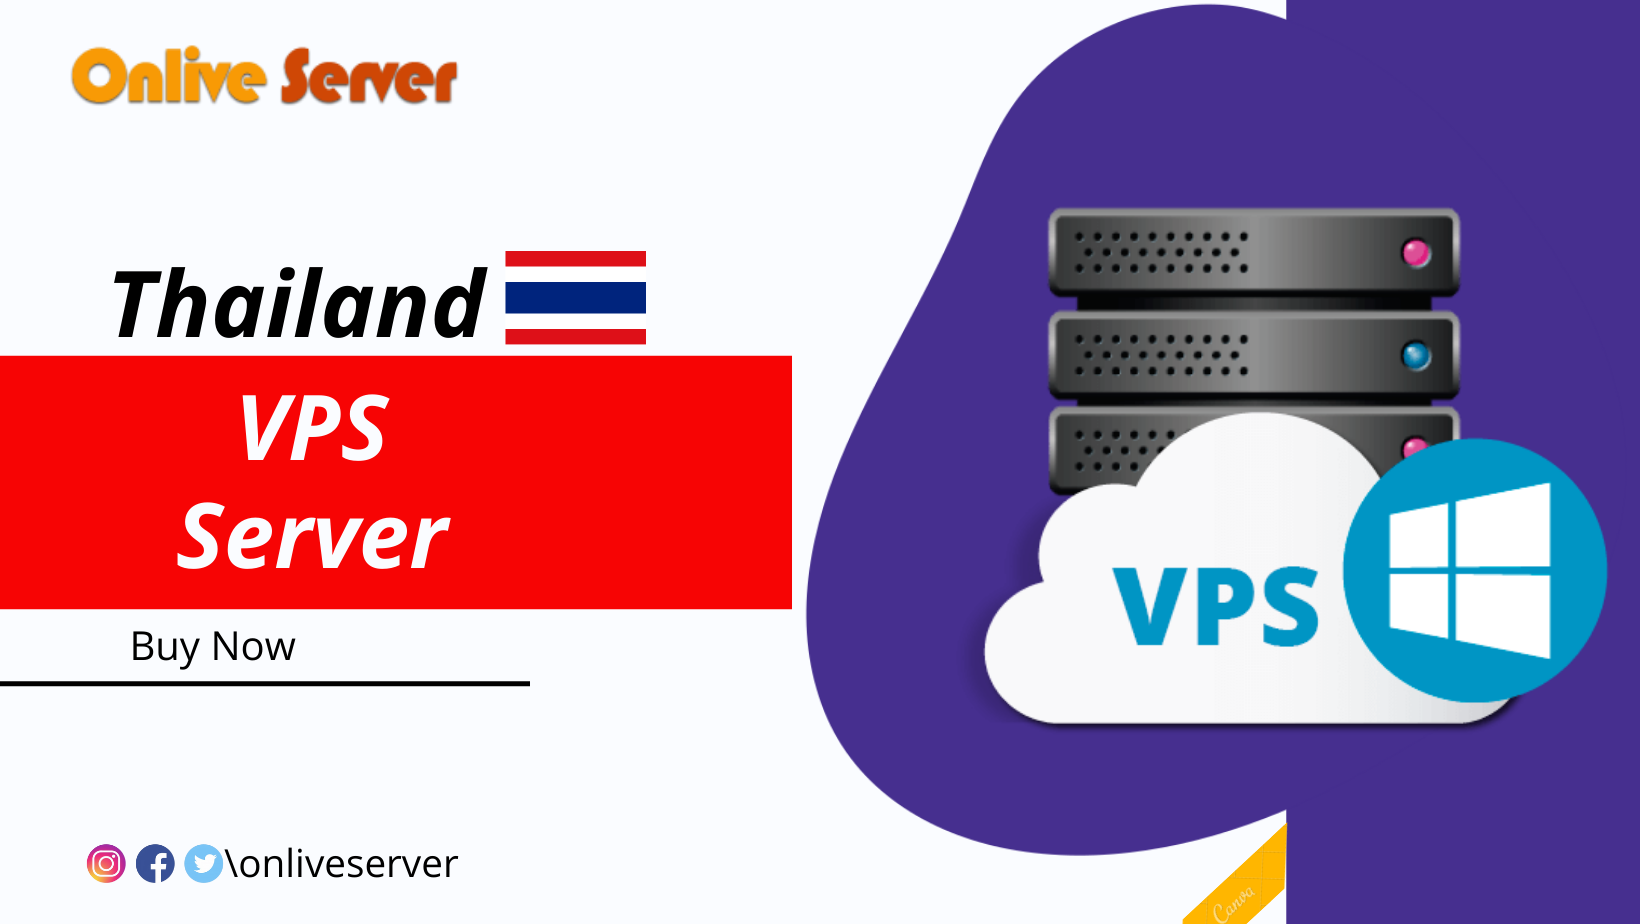 Highly Reliable and Secure Thailand VPS Server from Onlive Server￼